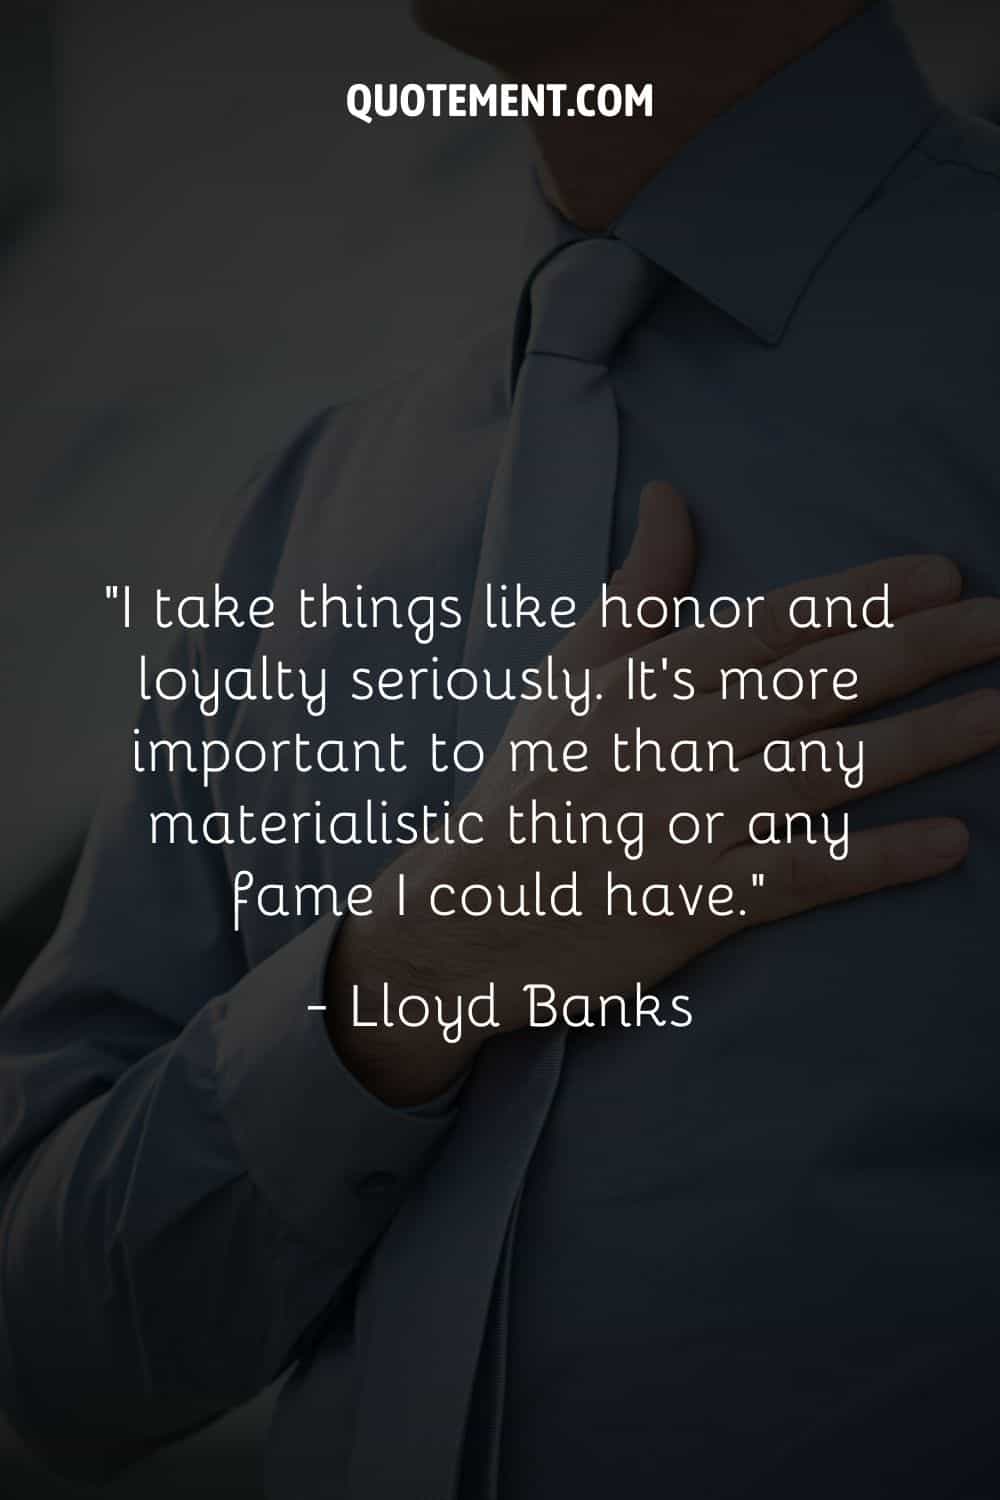 “I take things like honor and loyalty seriously. It's more important to me than any materialistic thing or any fame I could have.” ― Lloyd Banks